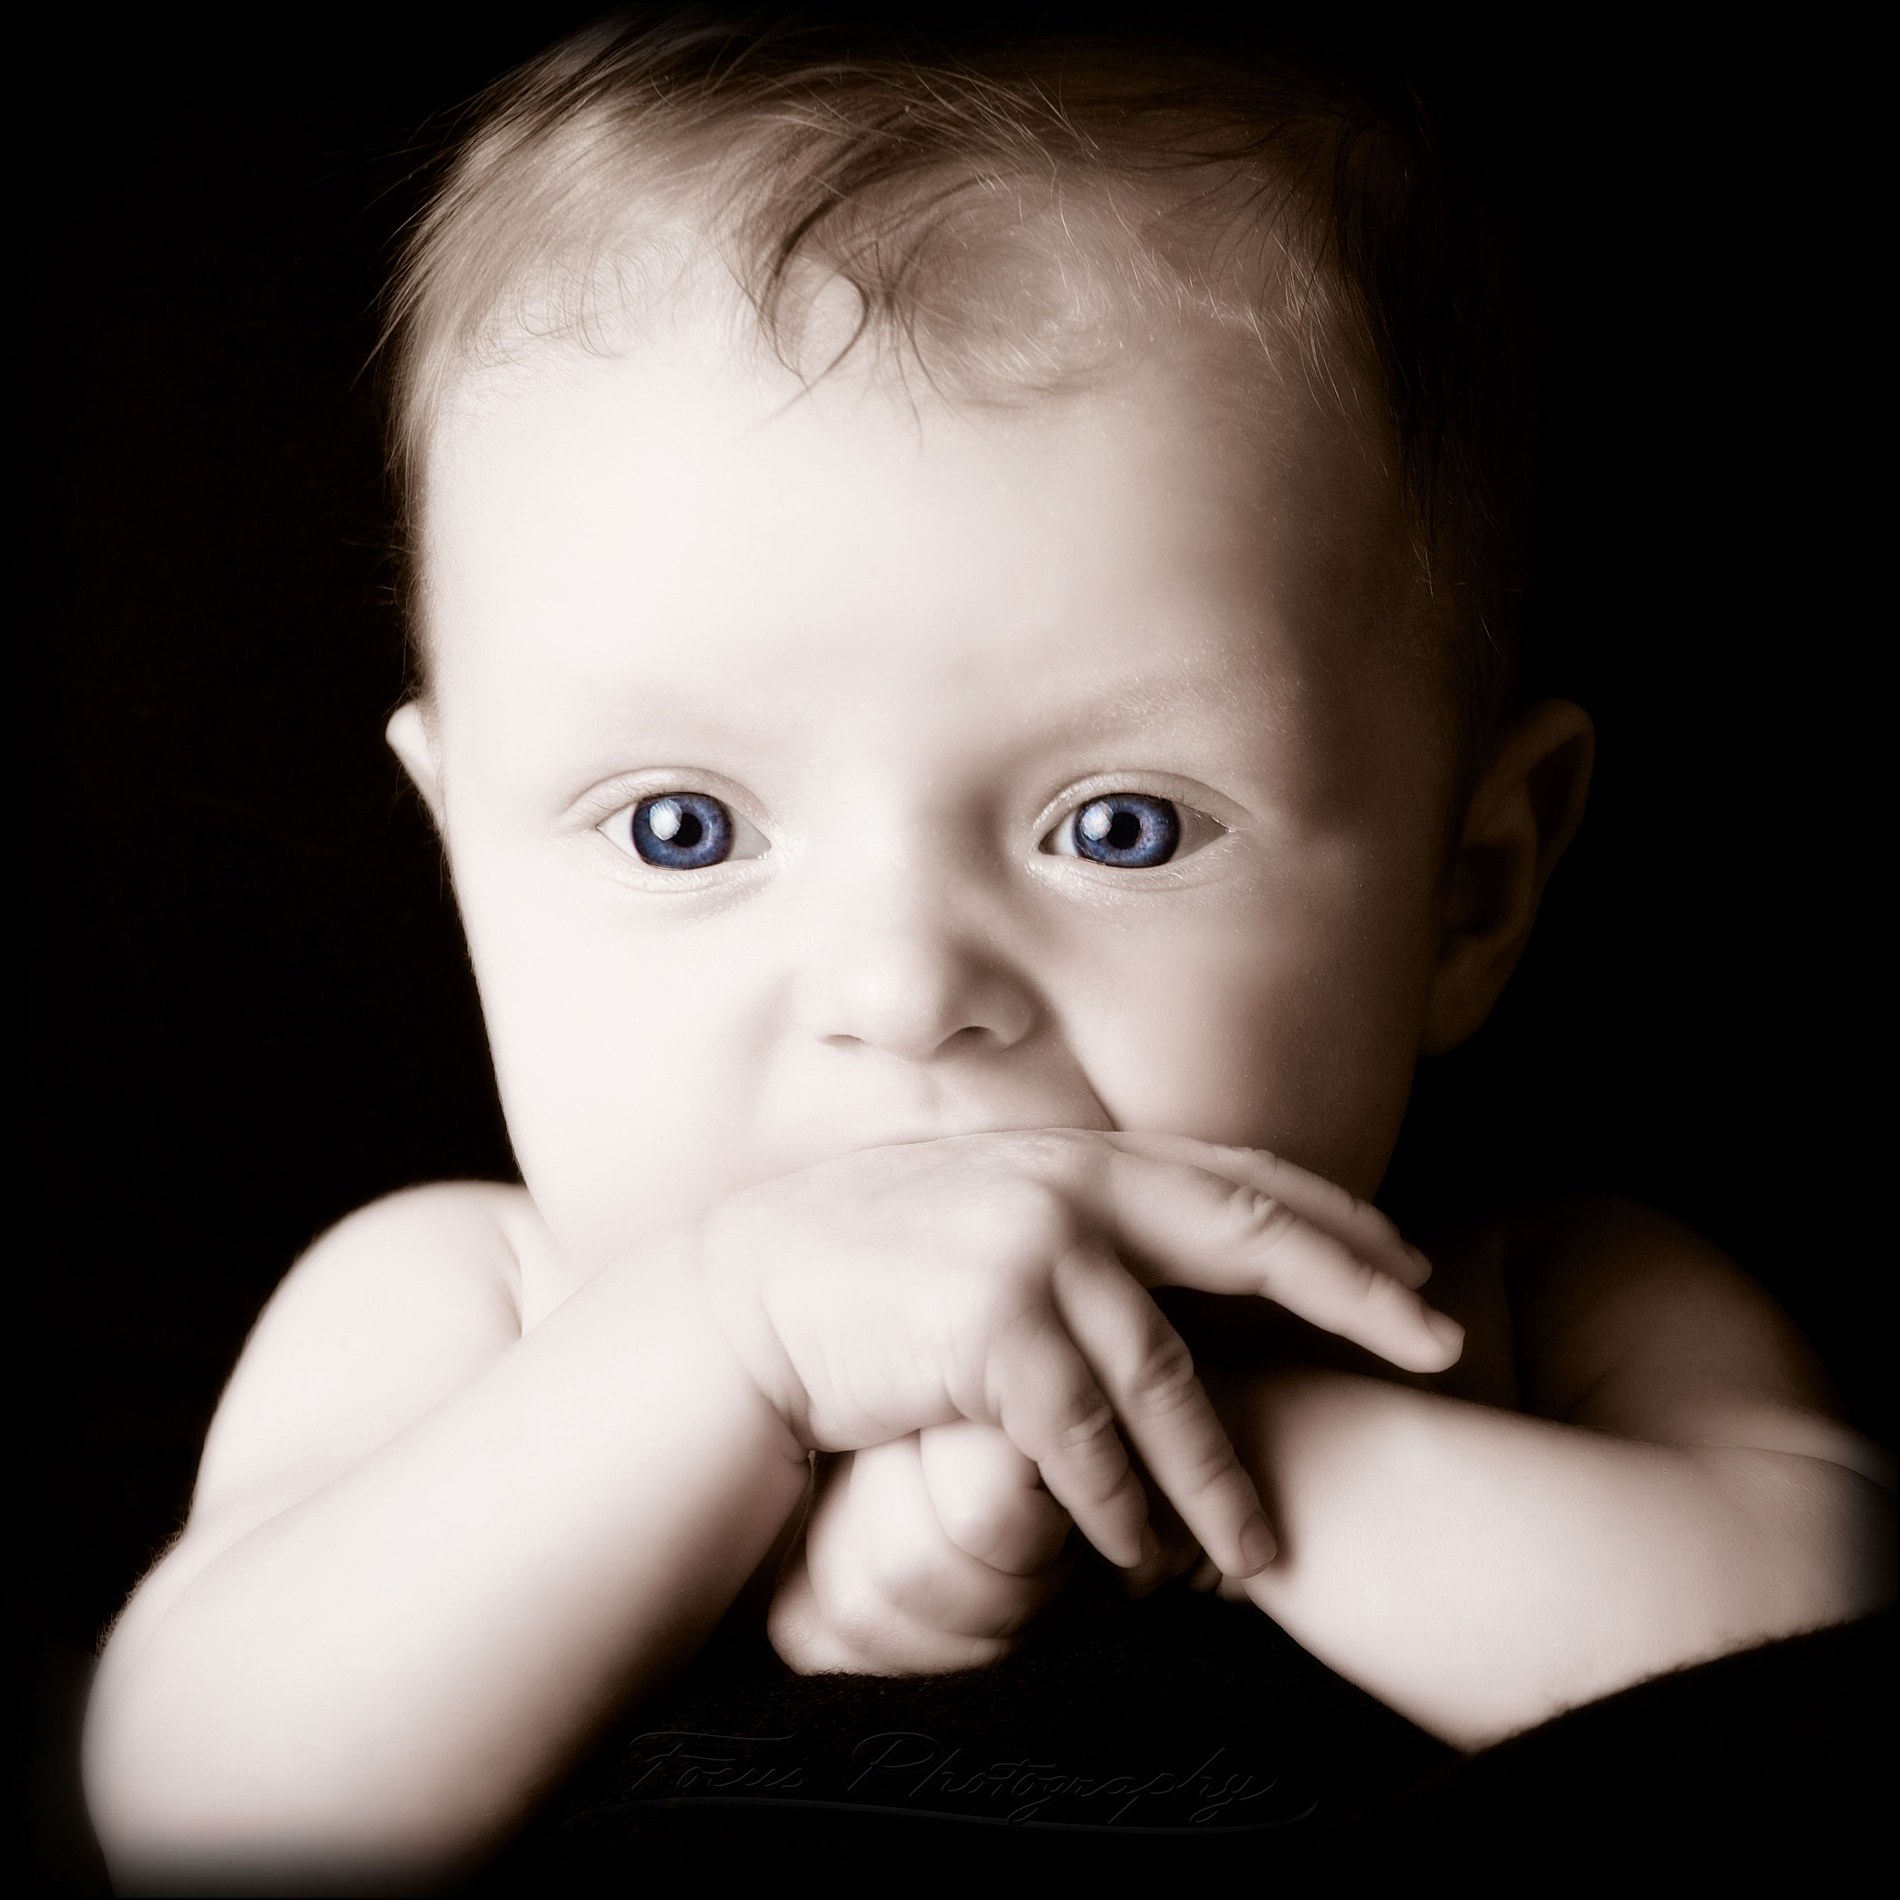 blue eyes look out from baby in black and white image